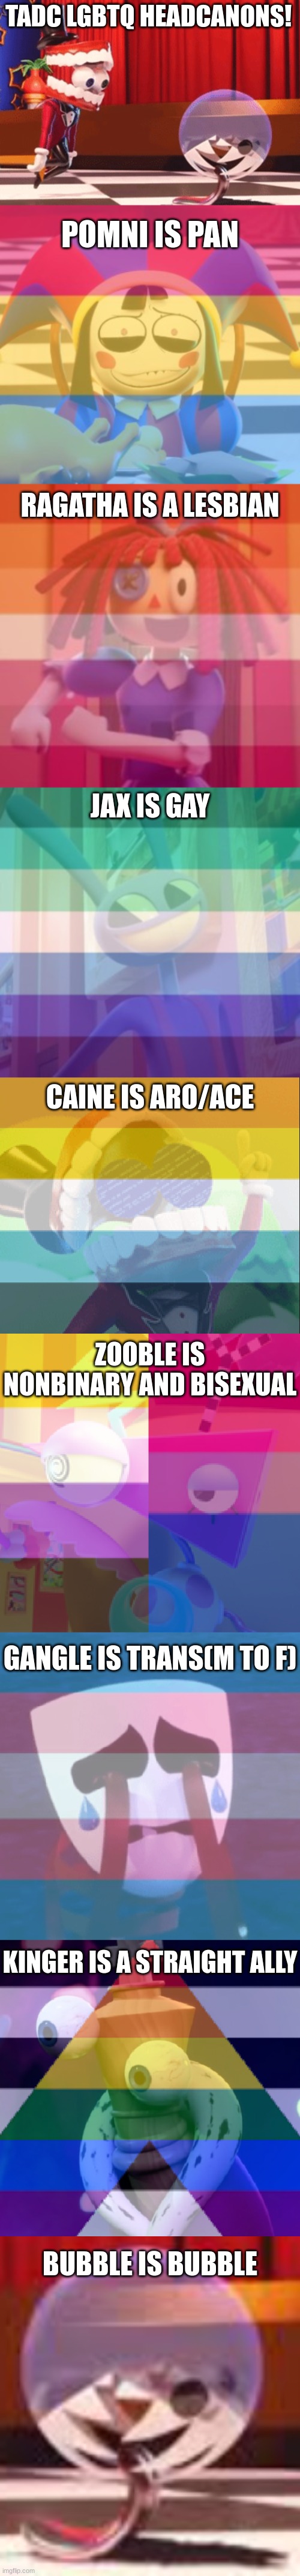 Feel free to disagree ig | TADC LGBTQ HEADCANONS! POMNI IS PAN; RAGATHA IS A LESBIAN; JAX IS GAY; CAINE IS ARO/ACE; ZOOBLE IS NONBINARY AND BISEXUAL; GANGLE IS TRANS(M TO F); KINGER IS A STRAIGHT ALLY; BUBBLE IS BUBBLE | image tagged in the amazing digital circus,lgbtq,headcanons,why are you reading this,you're still here aren't u | made w/ Imgflip meme maker